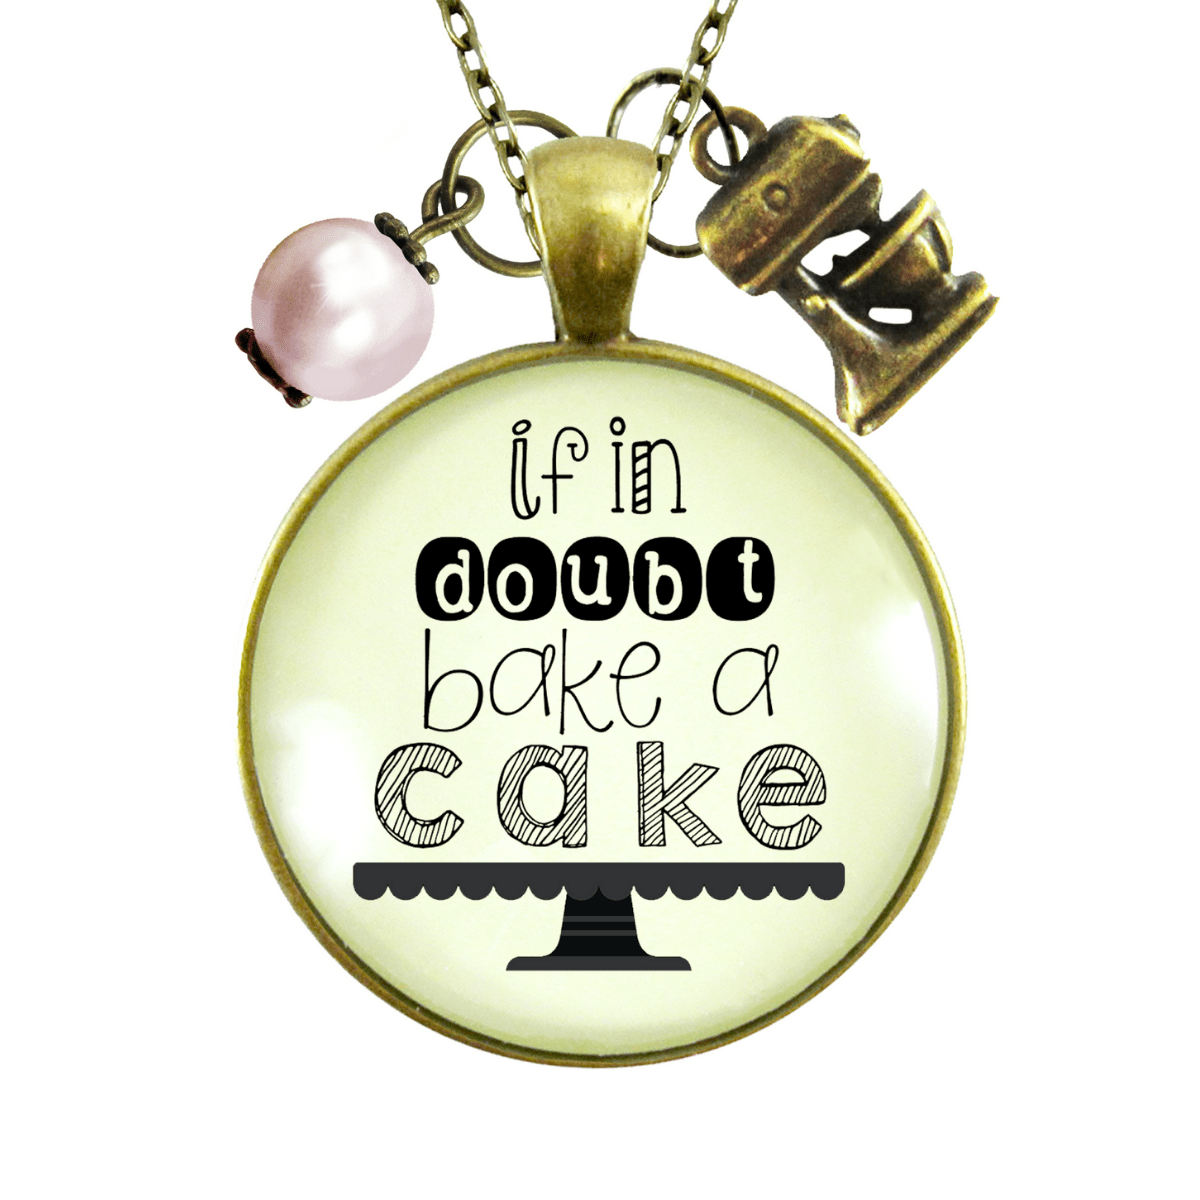 Gutsy Goodness Baking Necklace If in Doubt Bake Cake Foodie Lover Kitchen Mixer Jewelry Charm - Gutsy Goodness Handmade Jewelry;If In Doubt Bake A Cake - Gutsy Goodness Handmade Jewelry Gifts